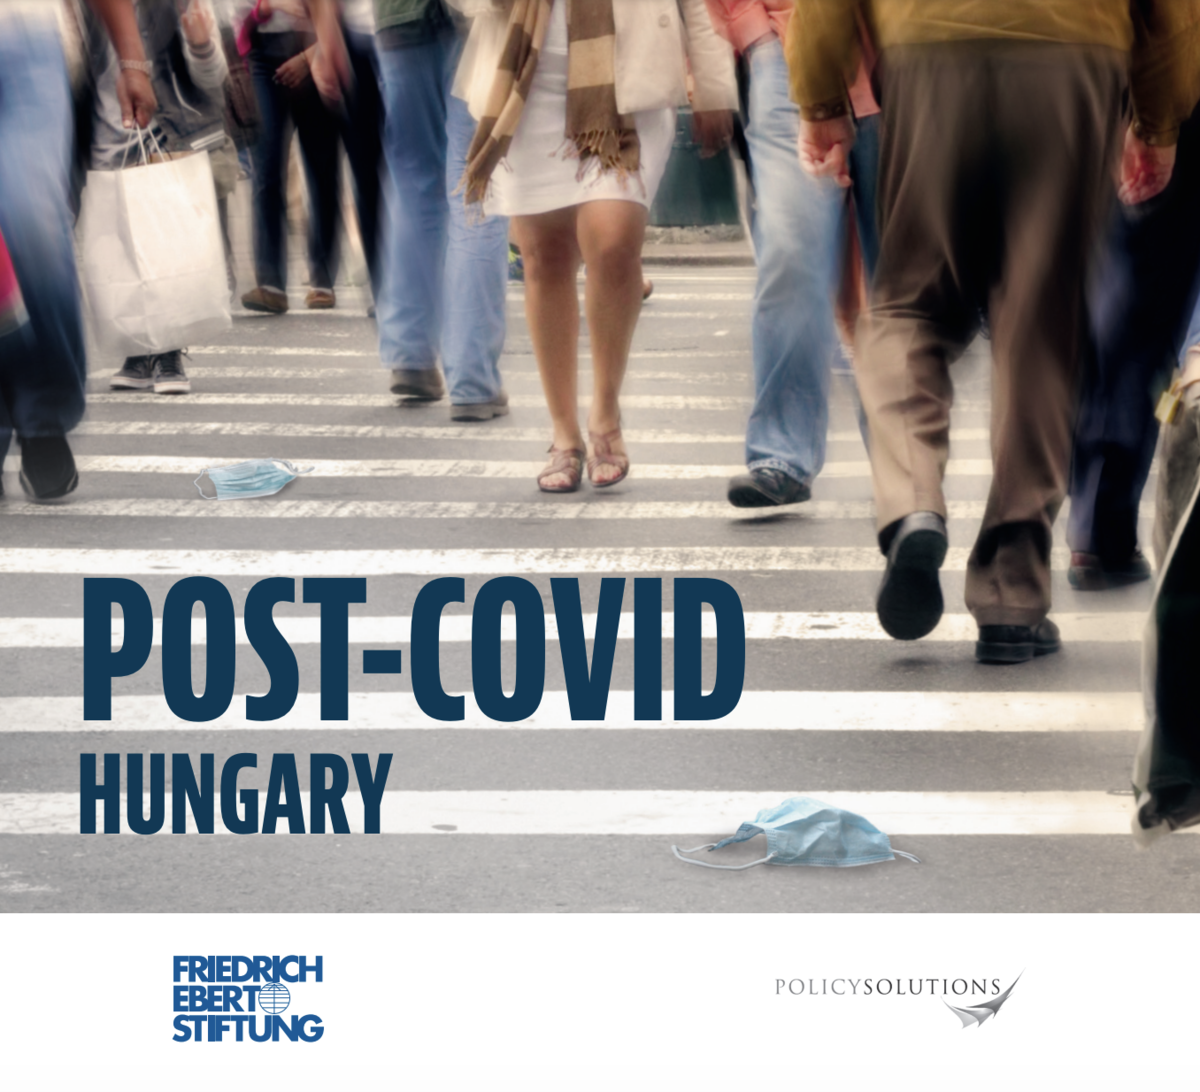 Book Launch of “Post-COVID Hungary